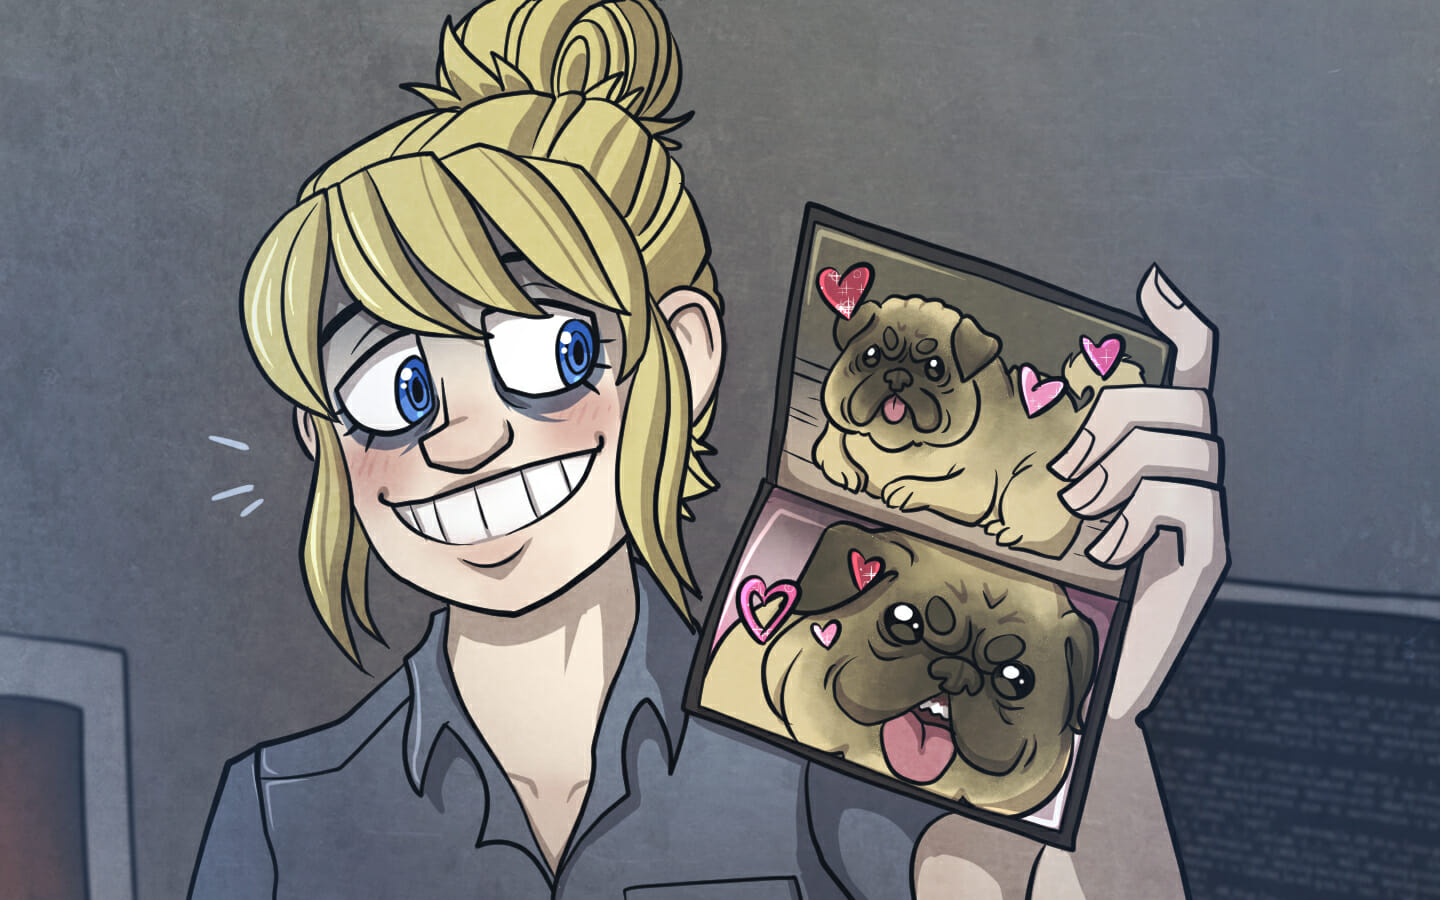 Tiffani shows Tim a picture of Haskell from her wallet. Haskell is an obese but oddly cute pug.